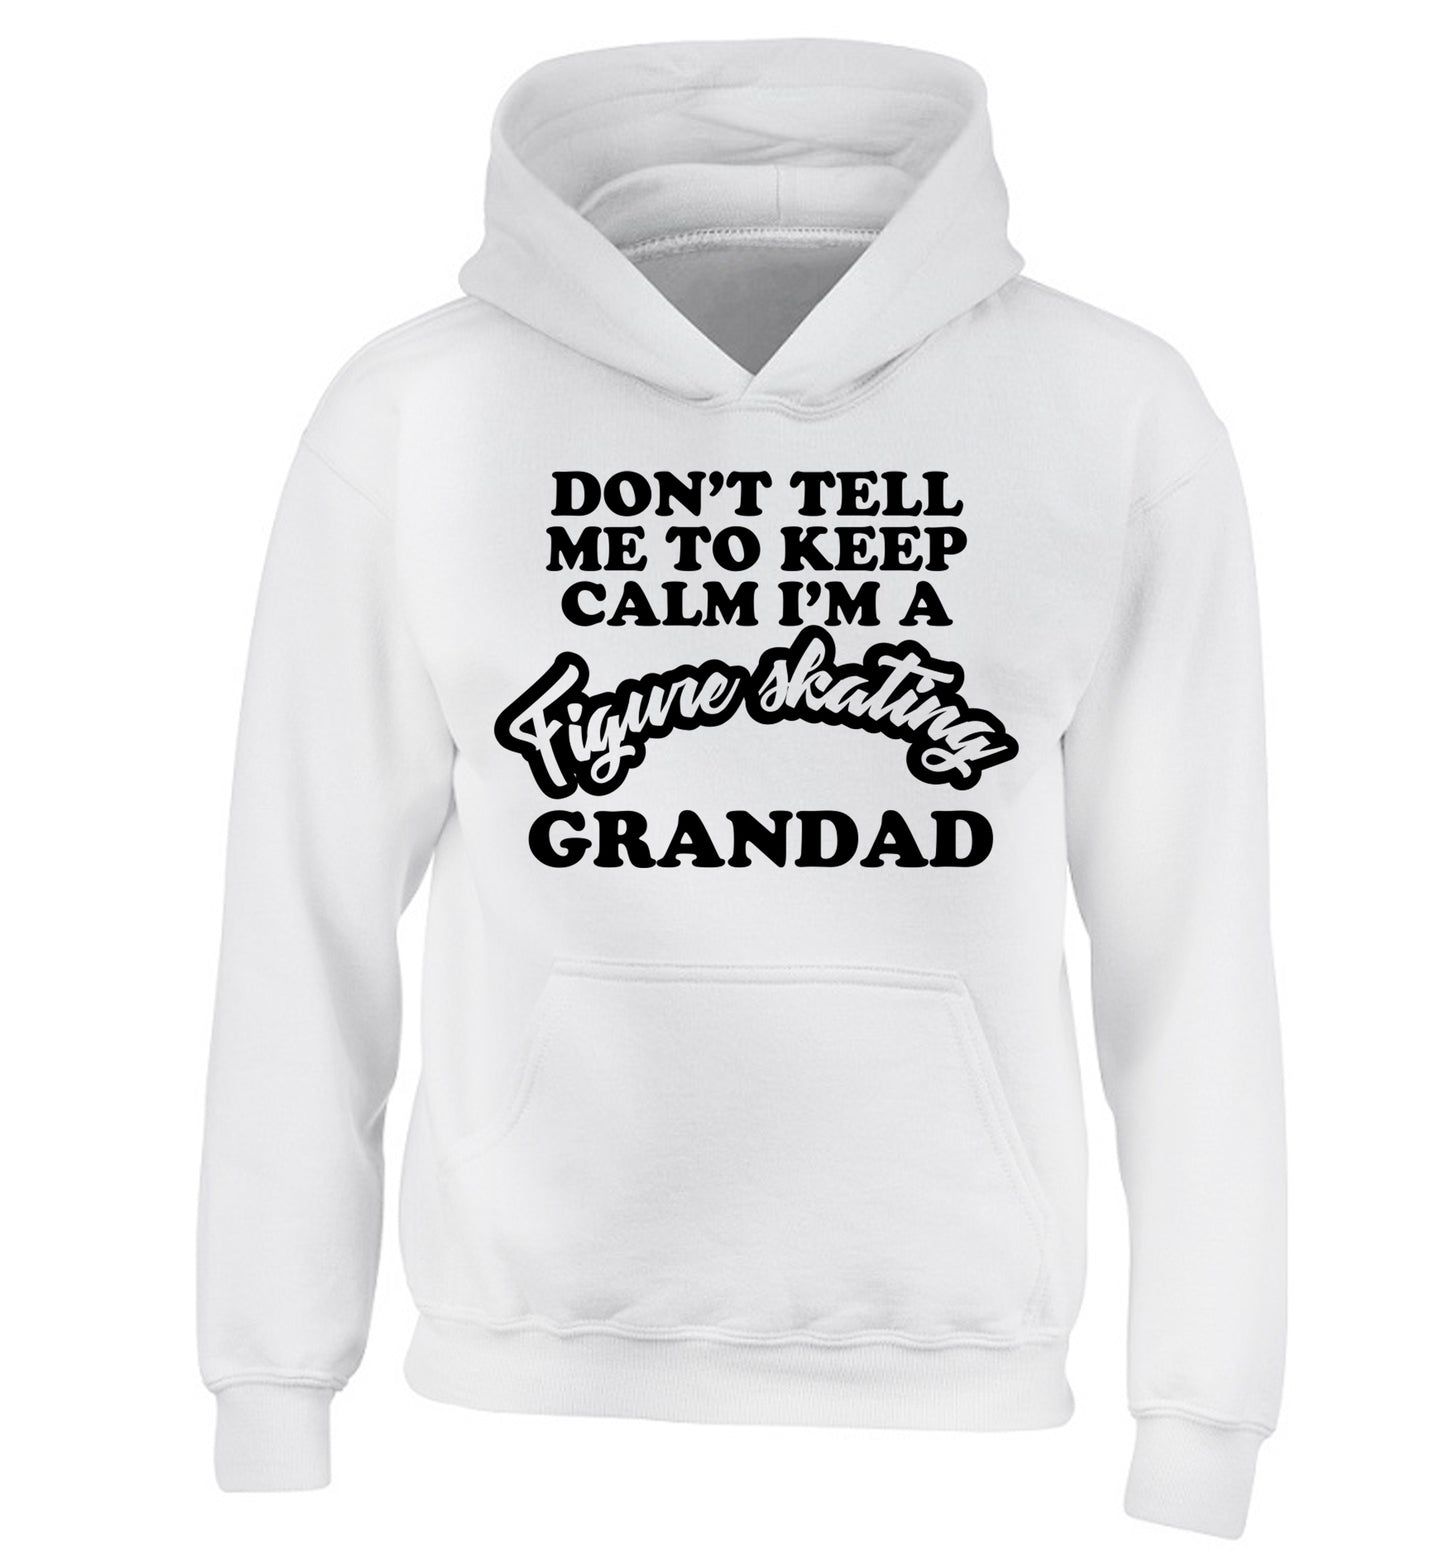 Don't tell me to keep calm I'm a figure skating grandad children's white hoodie 12-14 Years